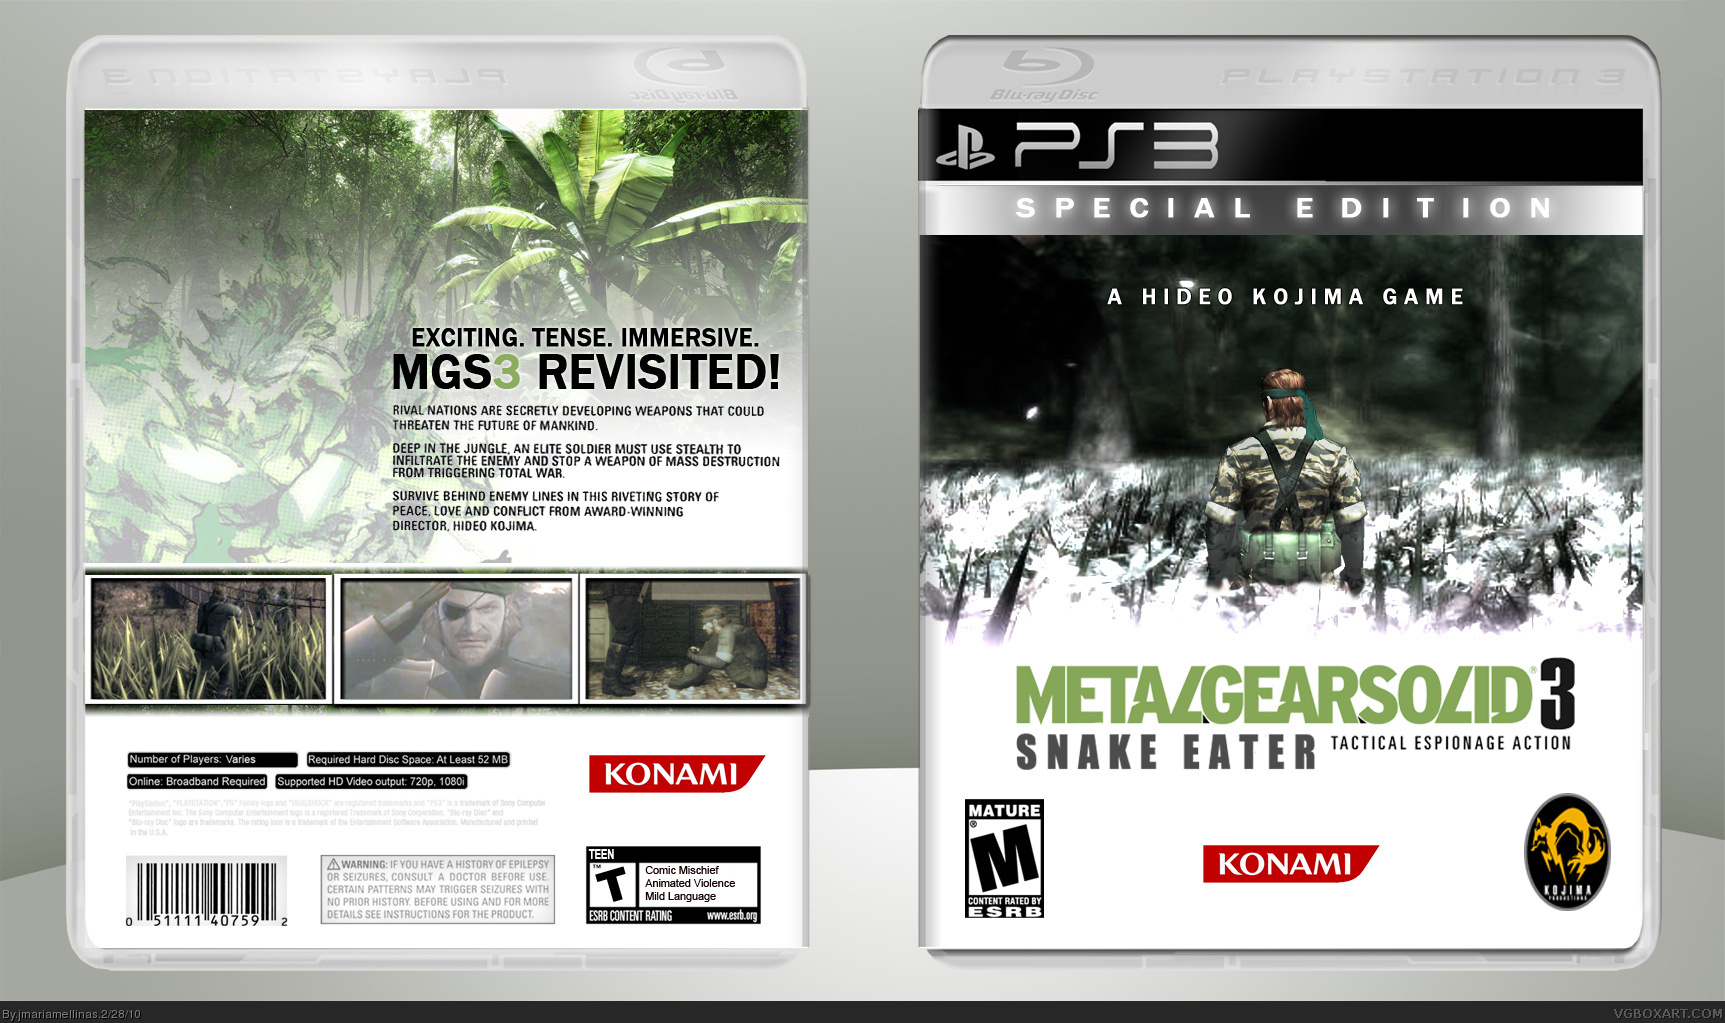 Mgs 3 master collection. Metal Gear Solid 3 Snake Eater ps3. Metal Gear Solid 3 ремейк. Metal Gear Snake Eater Remake. Metal Gear Solid 3 коробка.